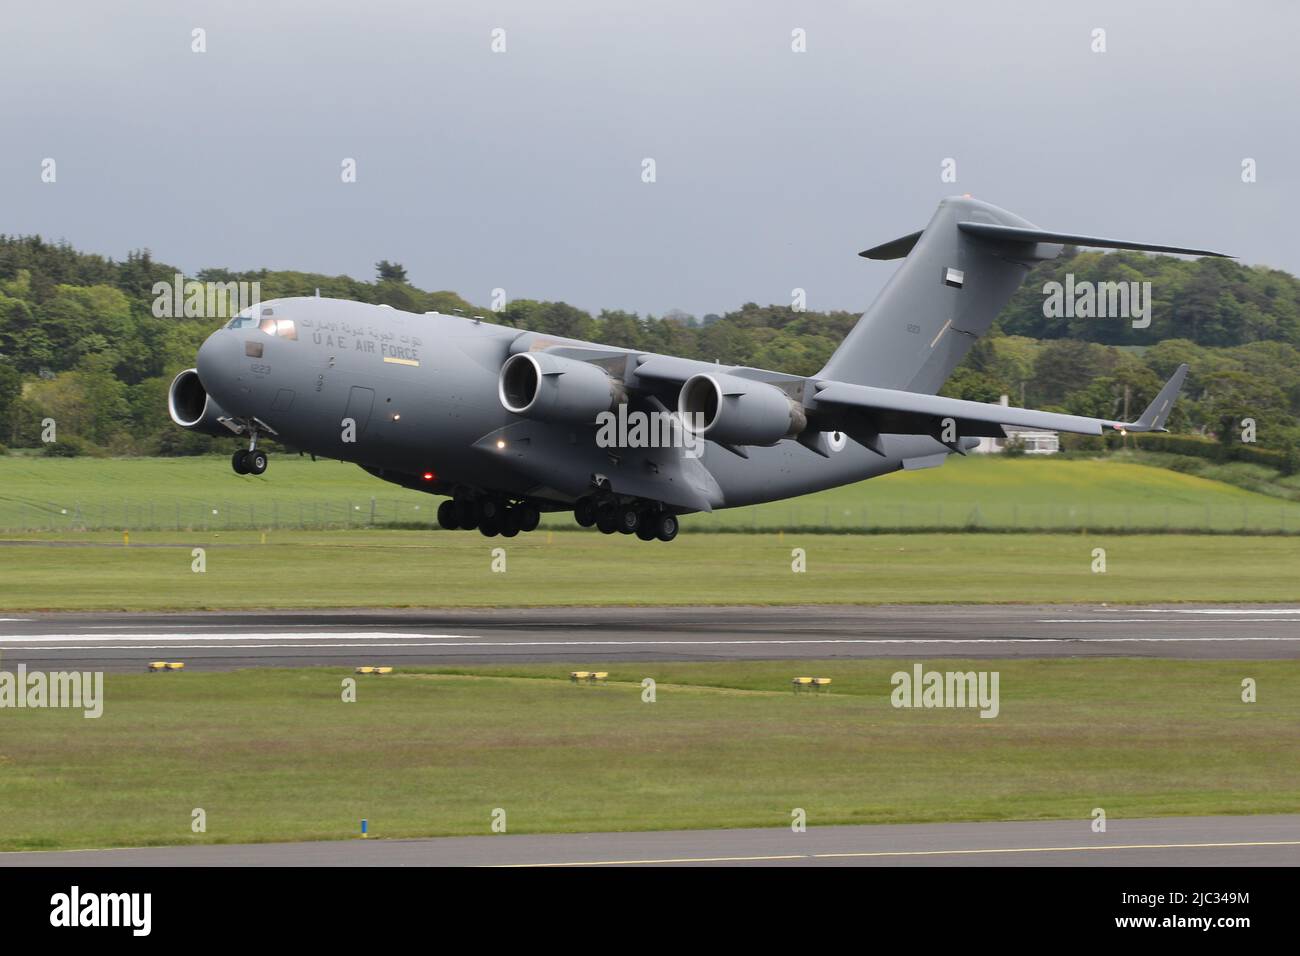 1223 (100401), a Boeing C-17 Globemaster III operated by the United Arab Emirates Air Force, arriving at Prestwick International Airport in Ayrshire, Scotland. Stock Photo